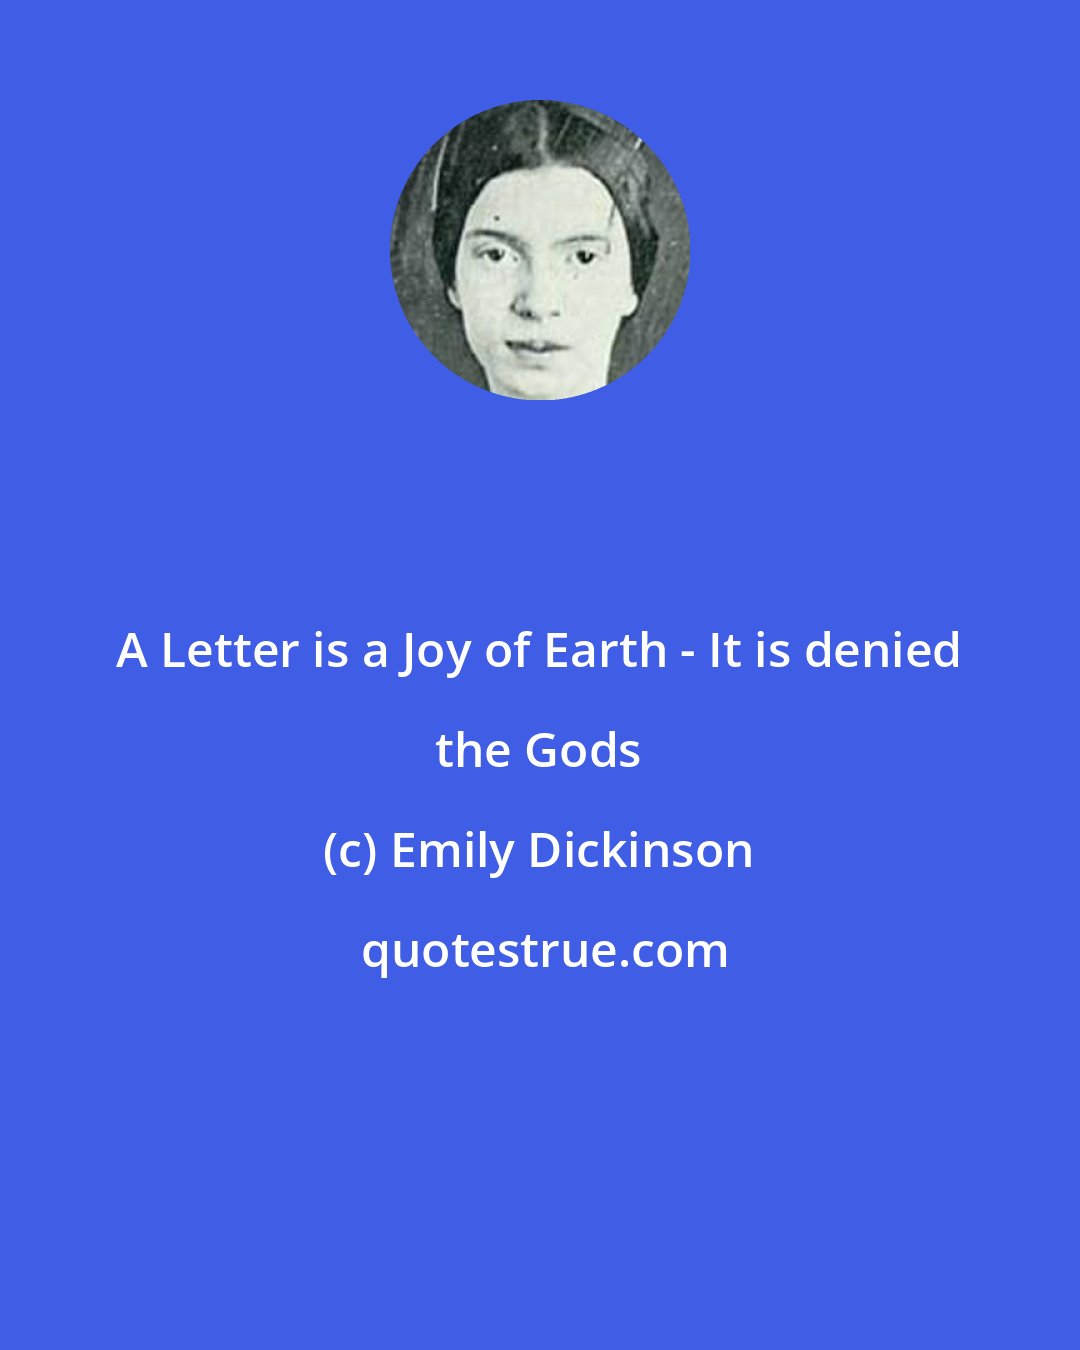 Emily Dickinson: A Letter is a Joy of Earth - It is denied the Gods